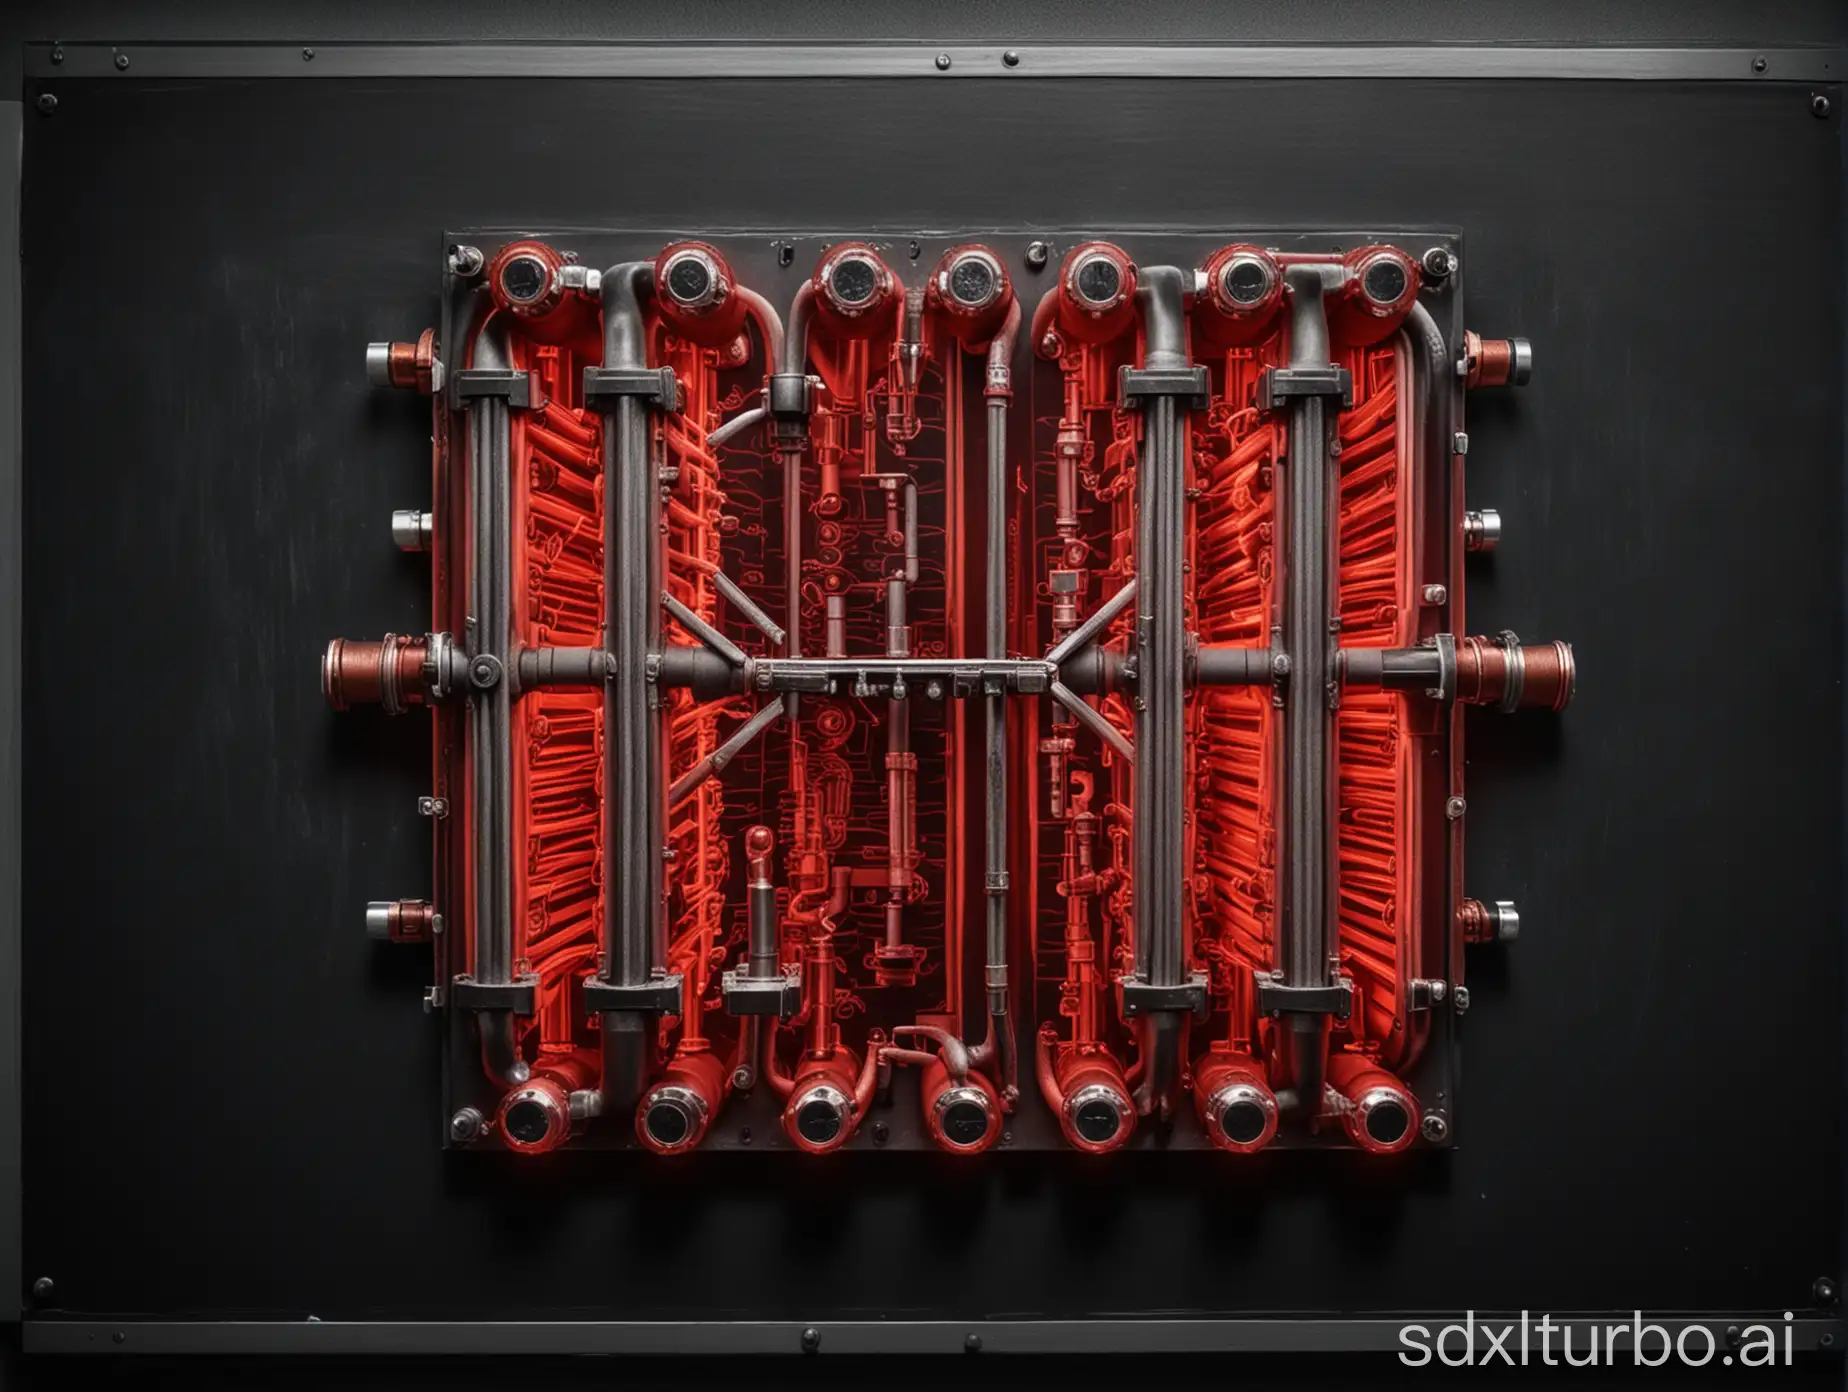 small compact powerful red glowing symmetric heat exchanger in black board explanation inverted color